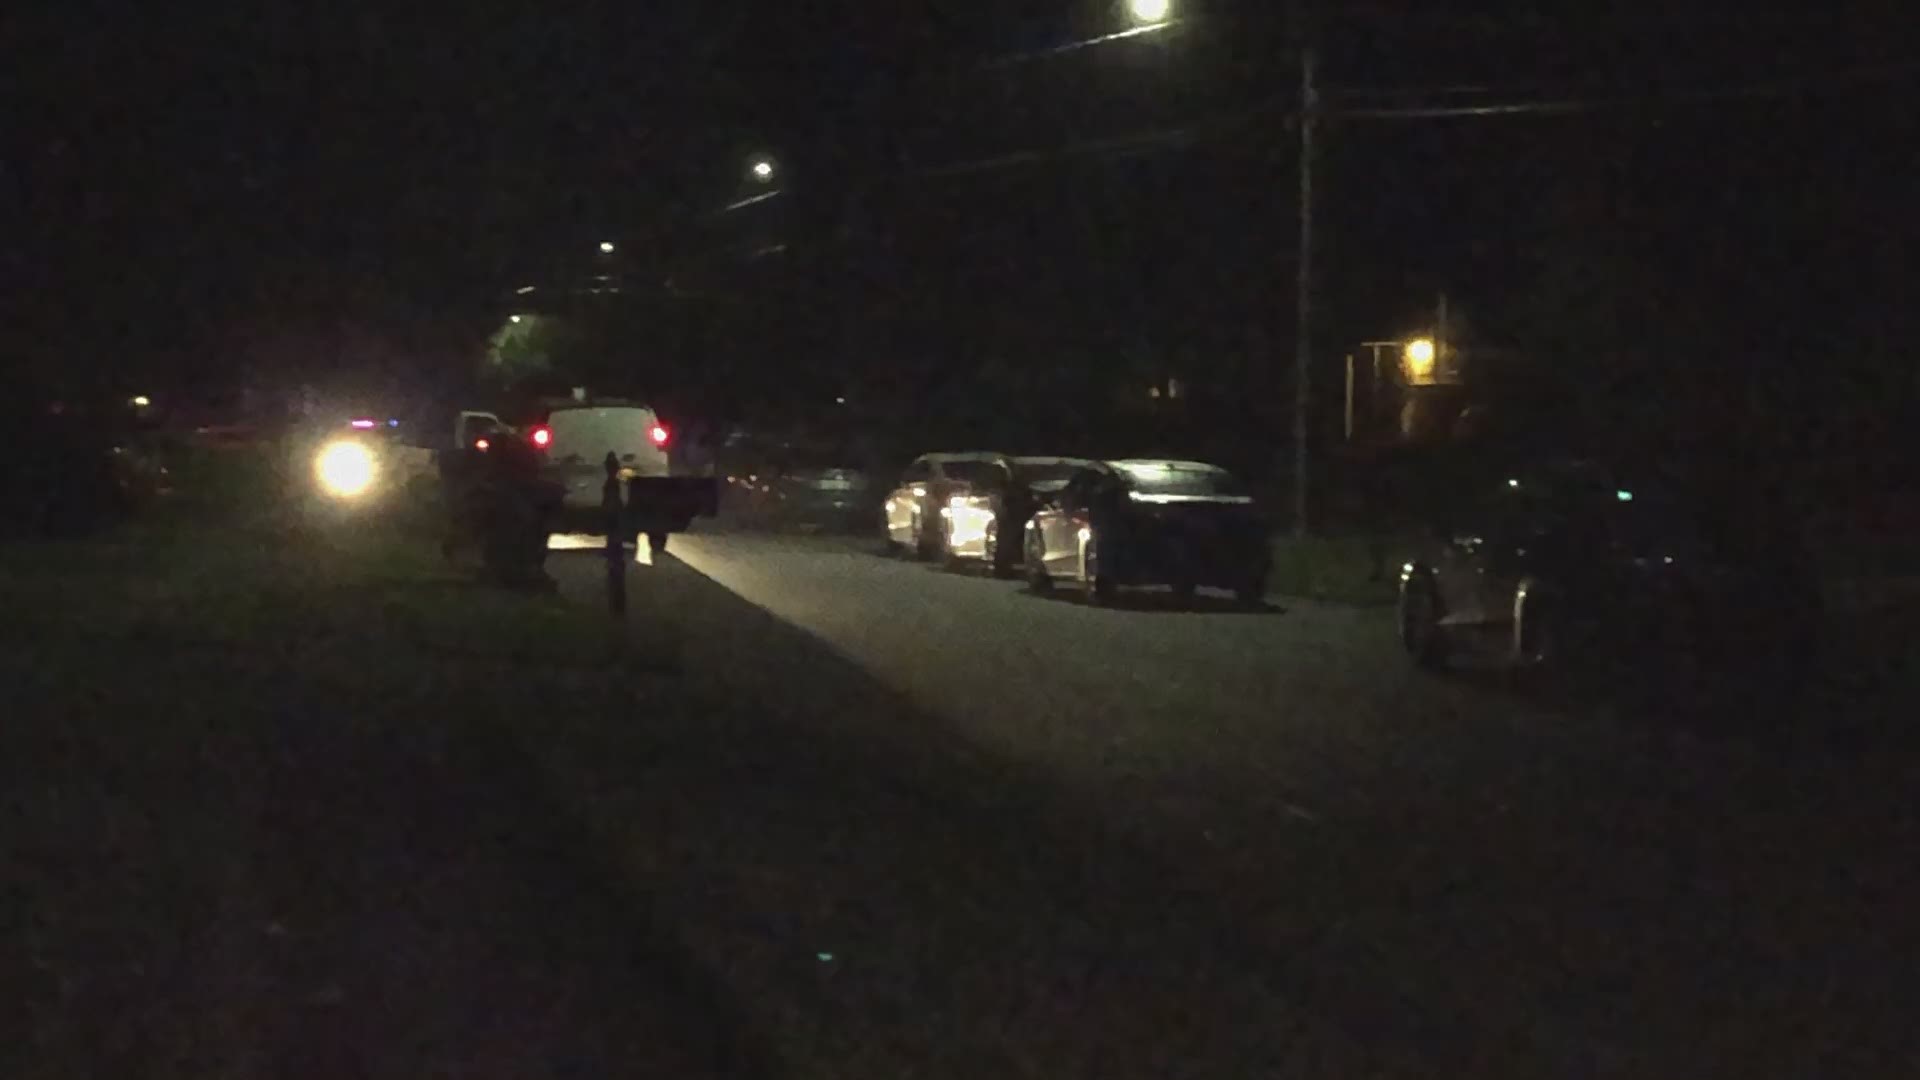 The Jacksonville Sheriff's Office responded to a reported shooting in the Sherwood Forest neighborhood.